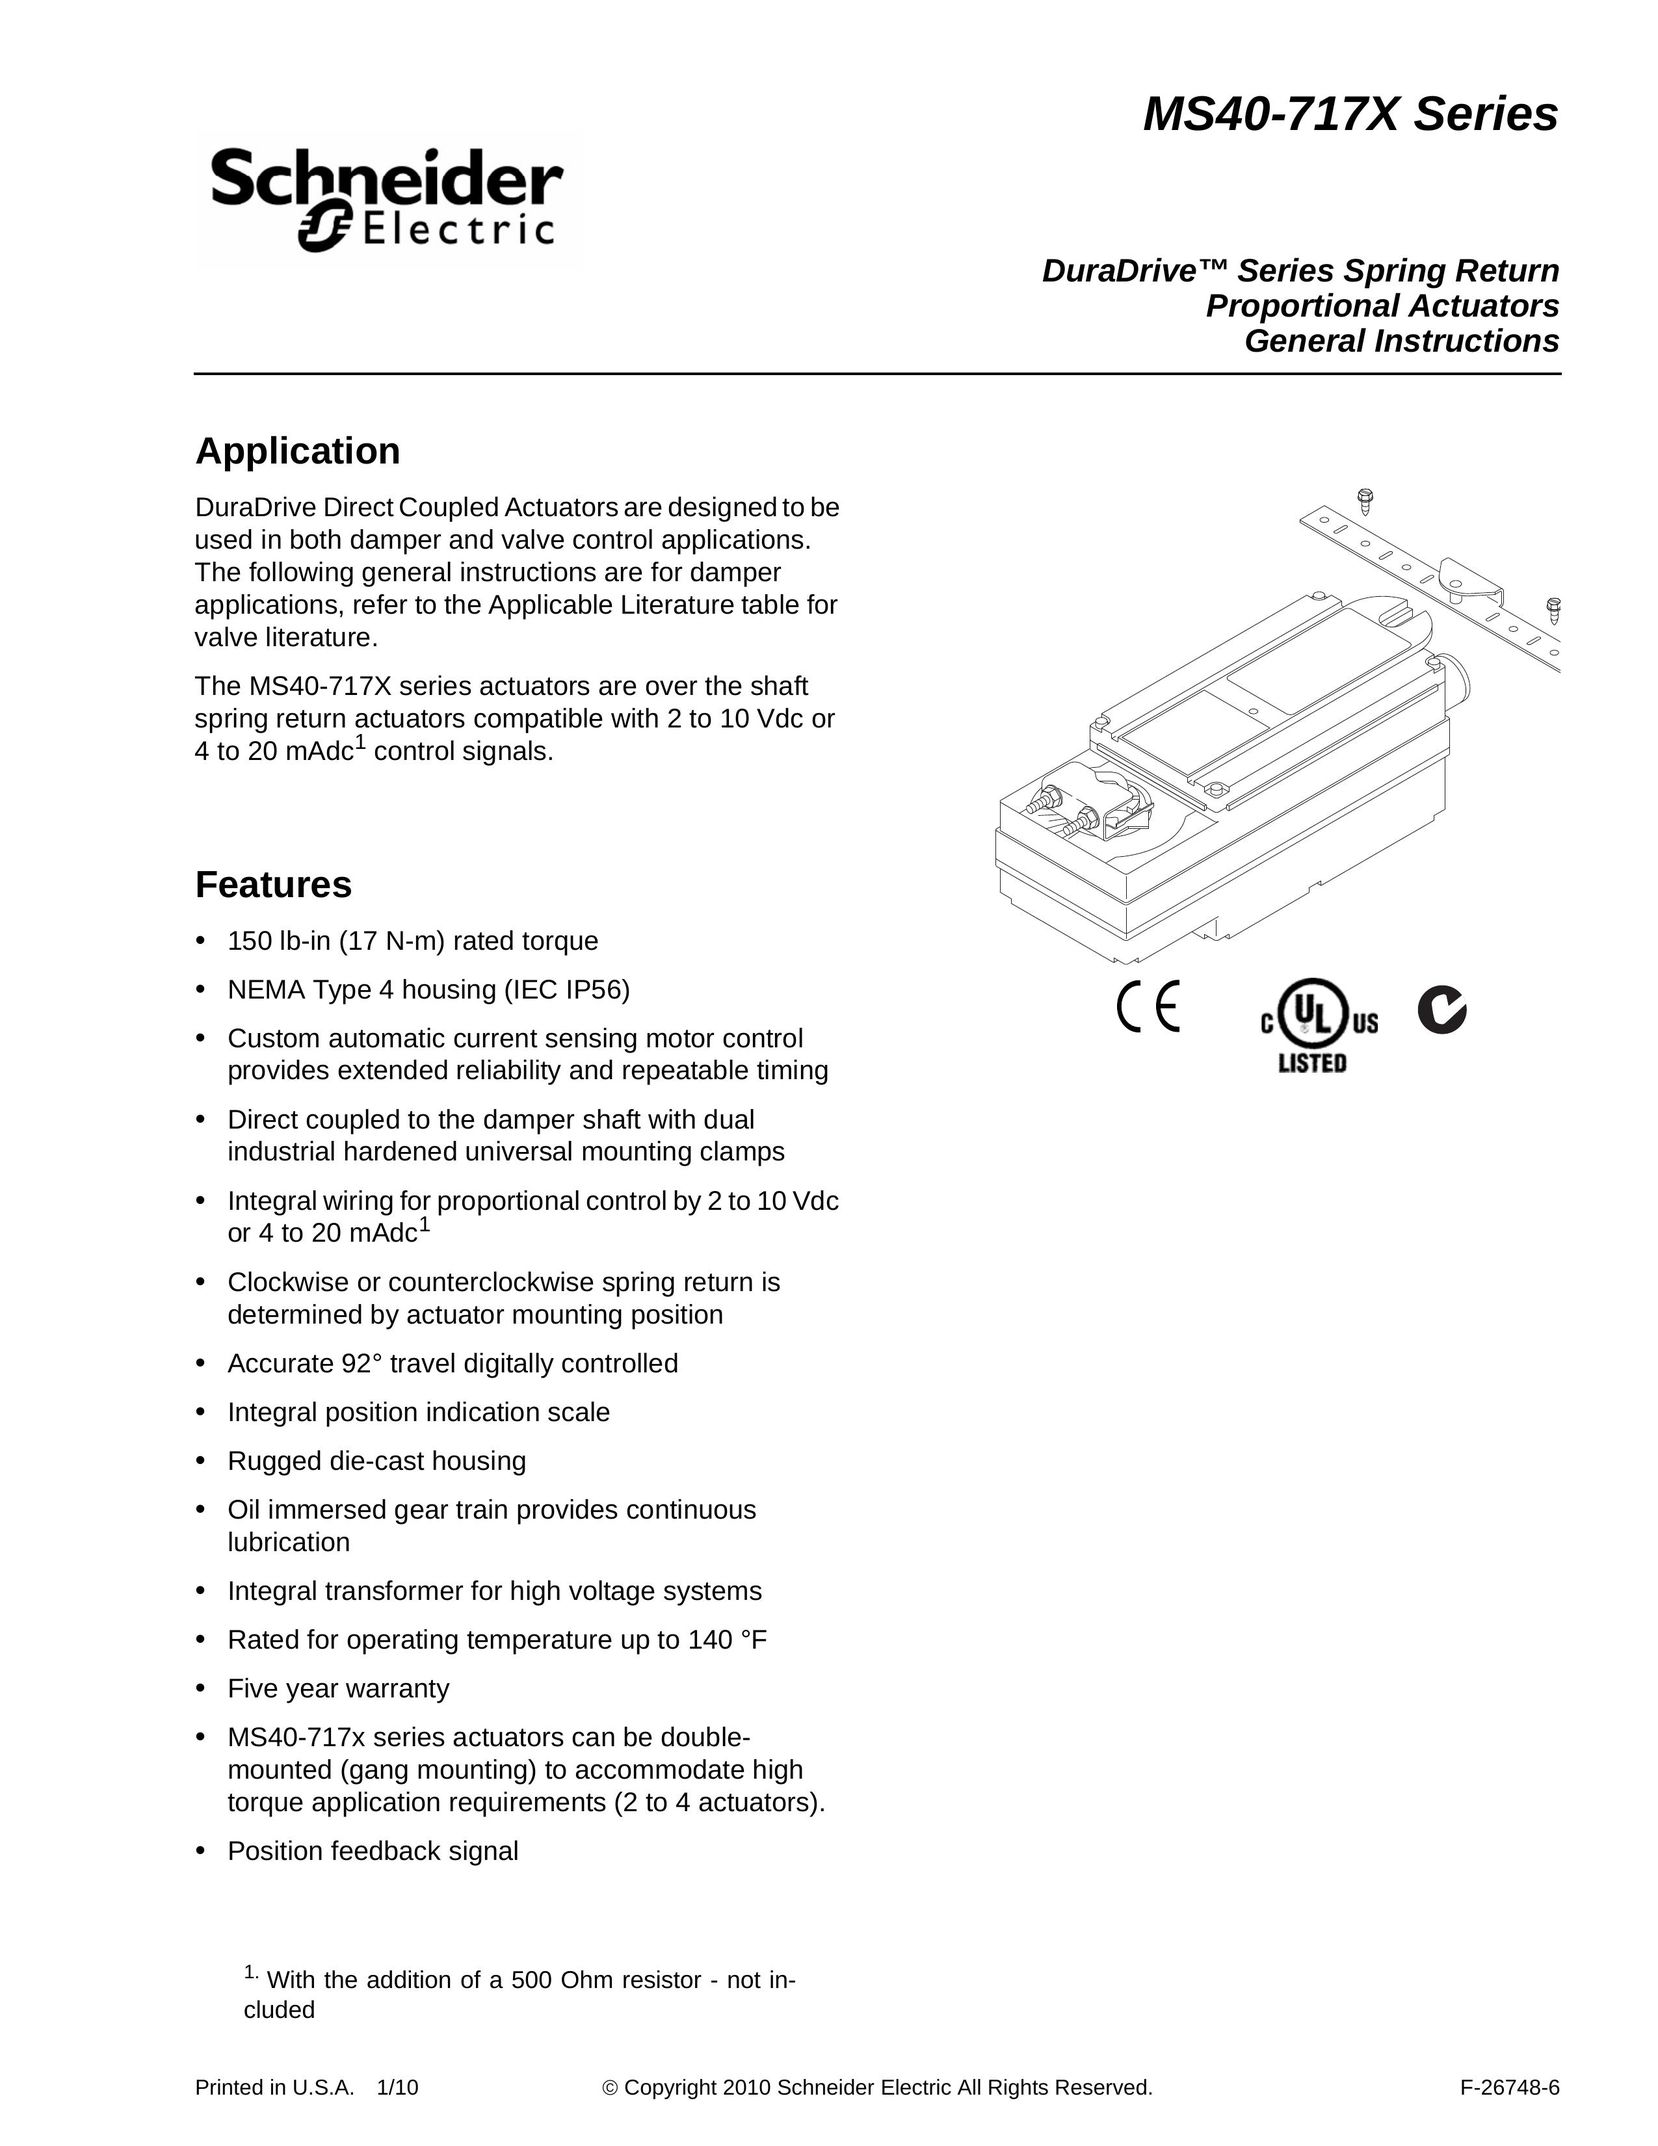 3Com MS40-717X Pager User Manual